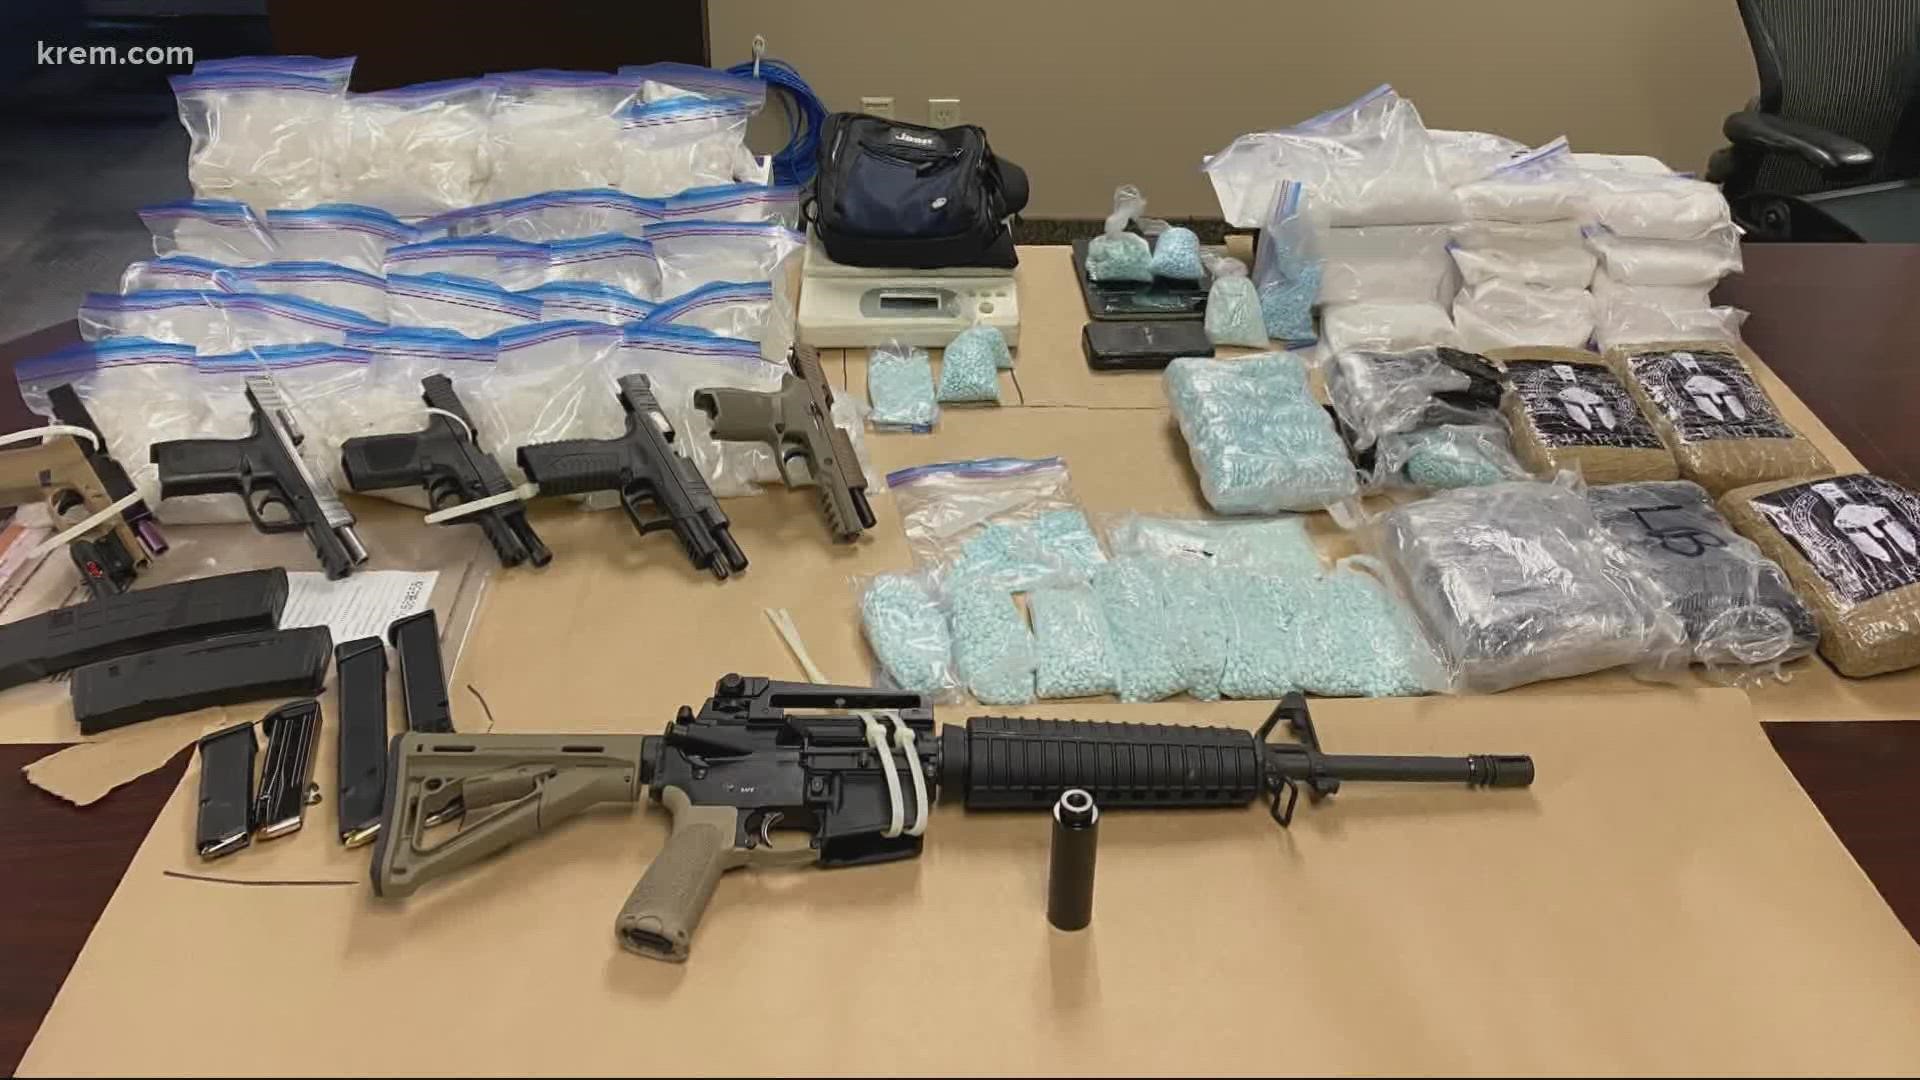 Approximately 35 pounds of methamphetamine, 50,000 fake pills believed to contain fentanyl and seven guns were seized.